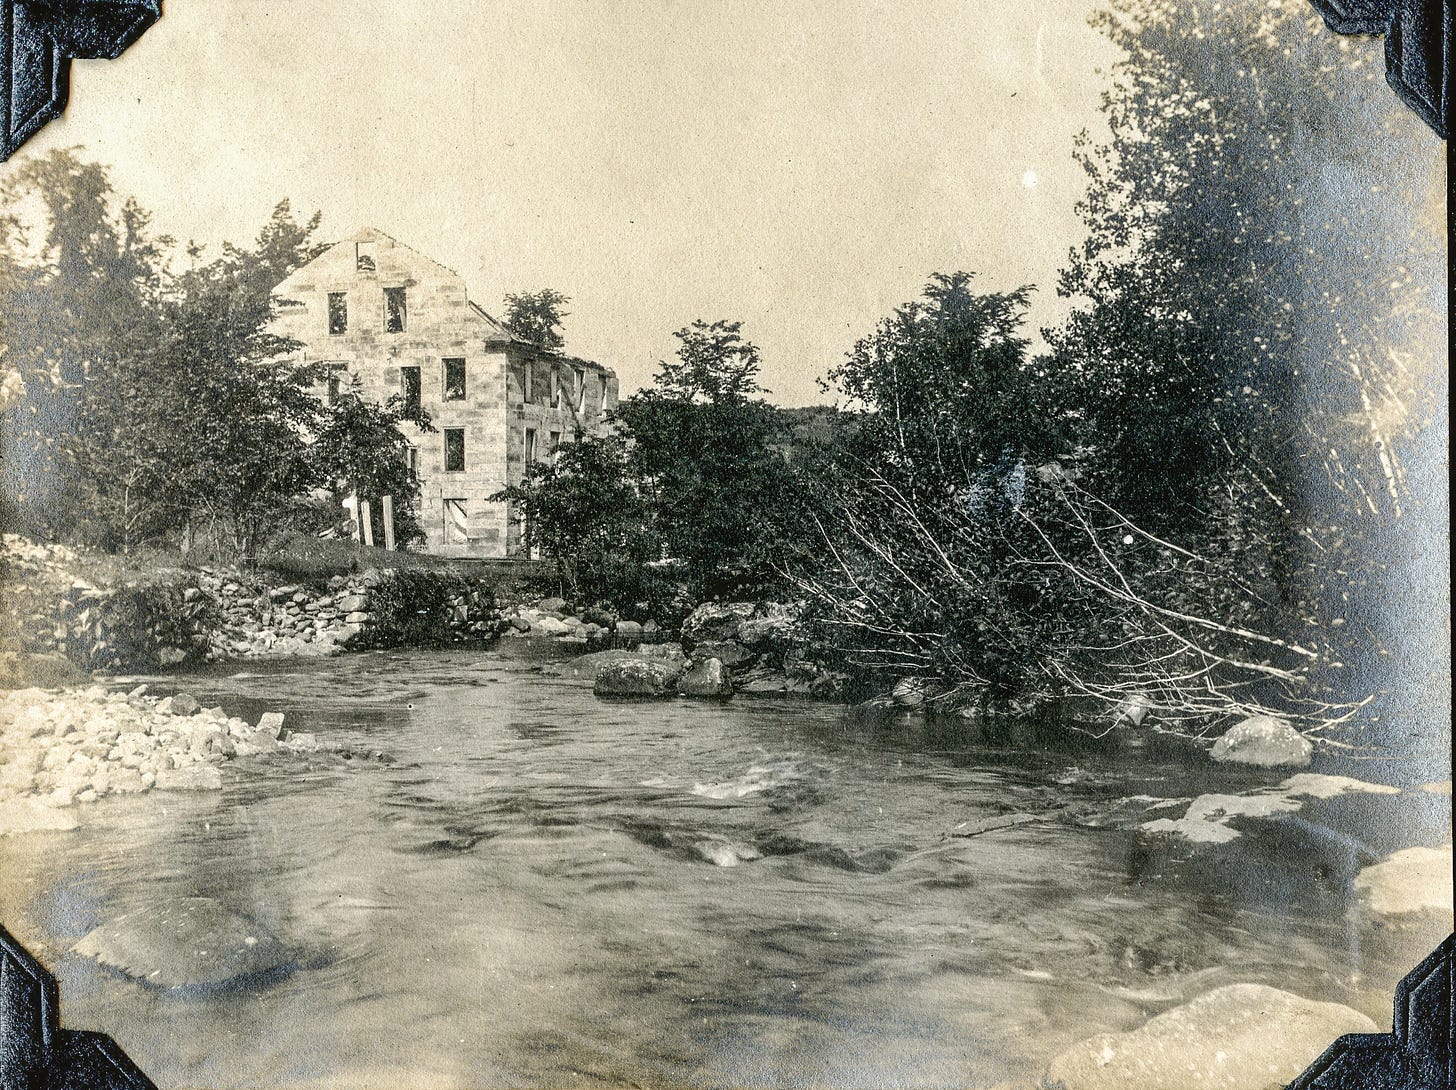 Browns Mill